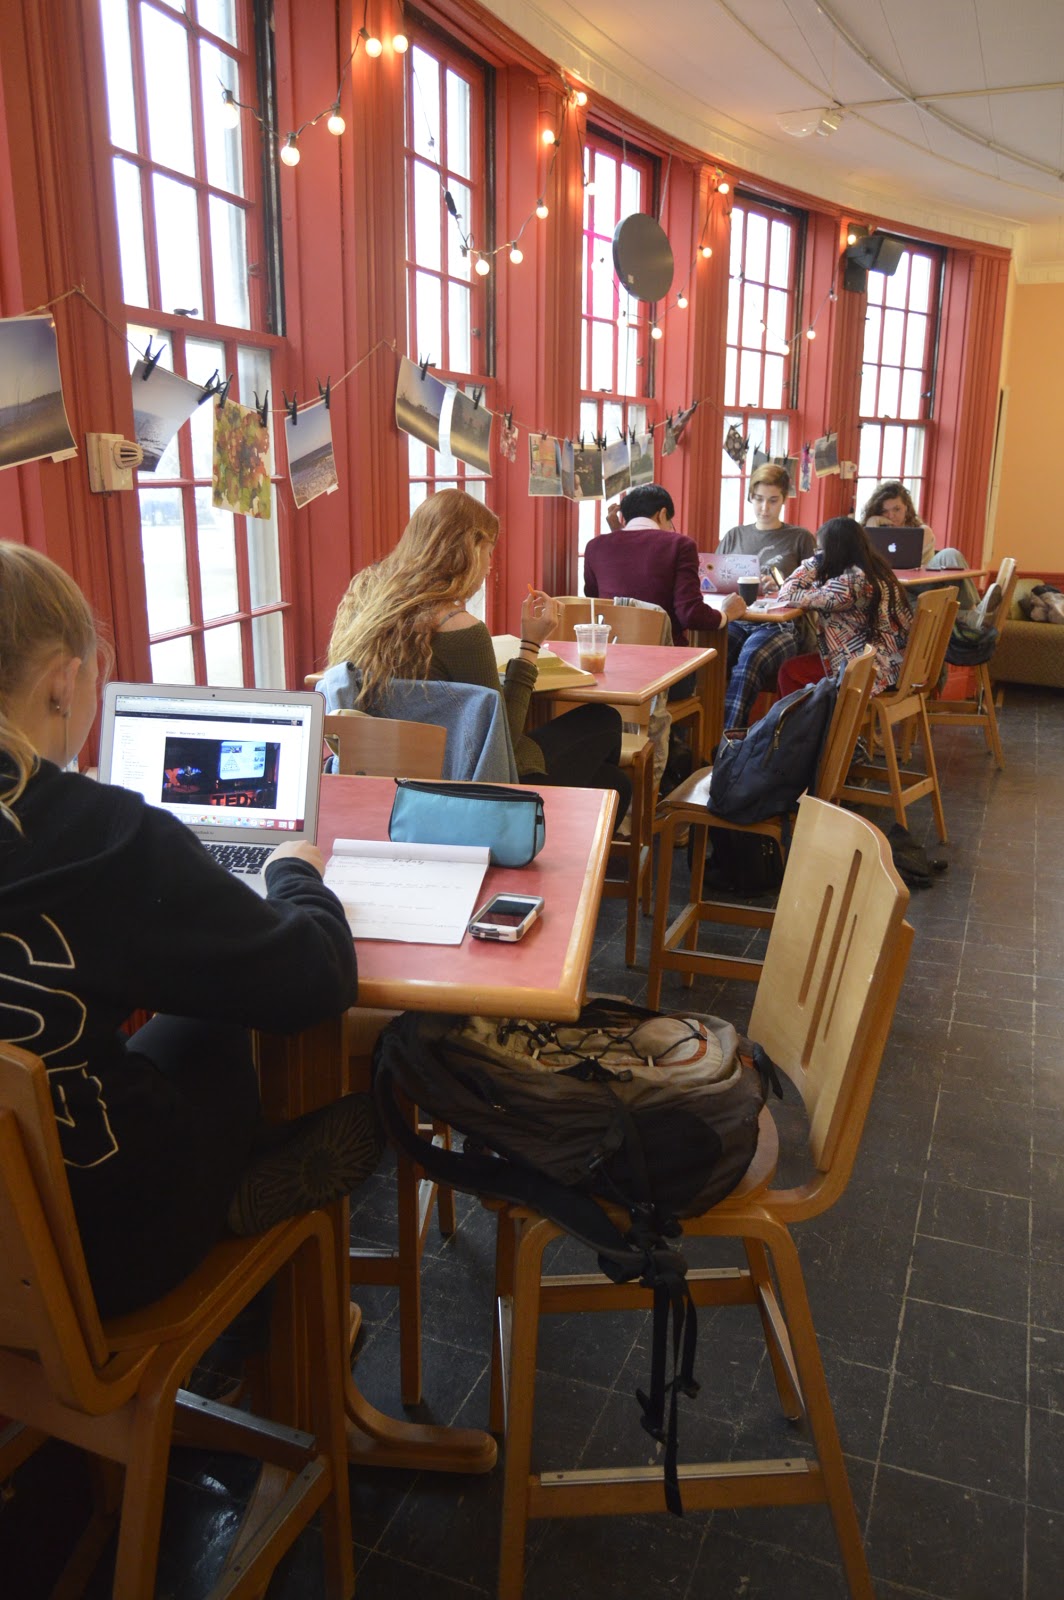 Students studying in front of the bright windows in the Coffee Closet